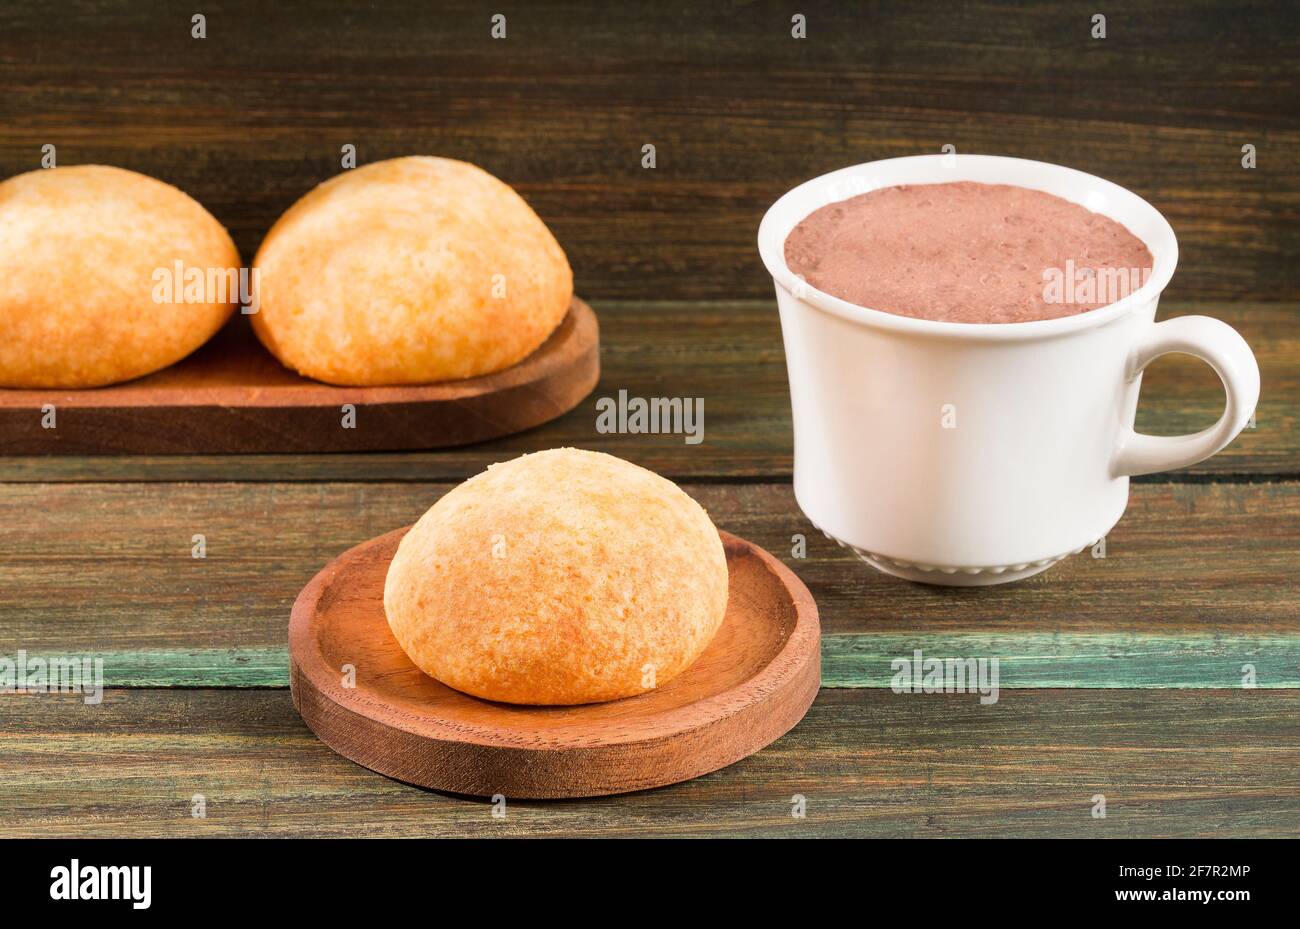 Delicious Colombian almojabanas for breakfast - Wooden background Stock Photo